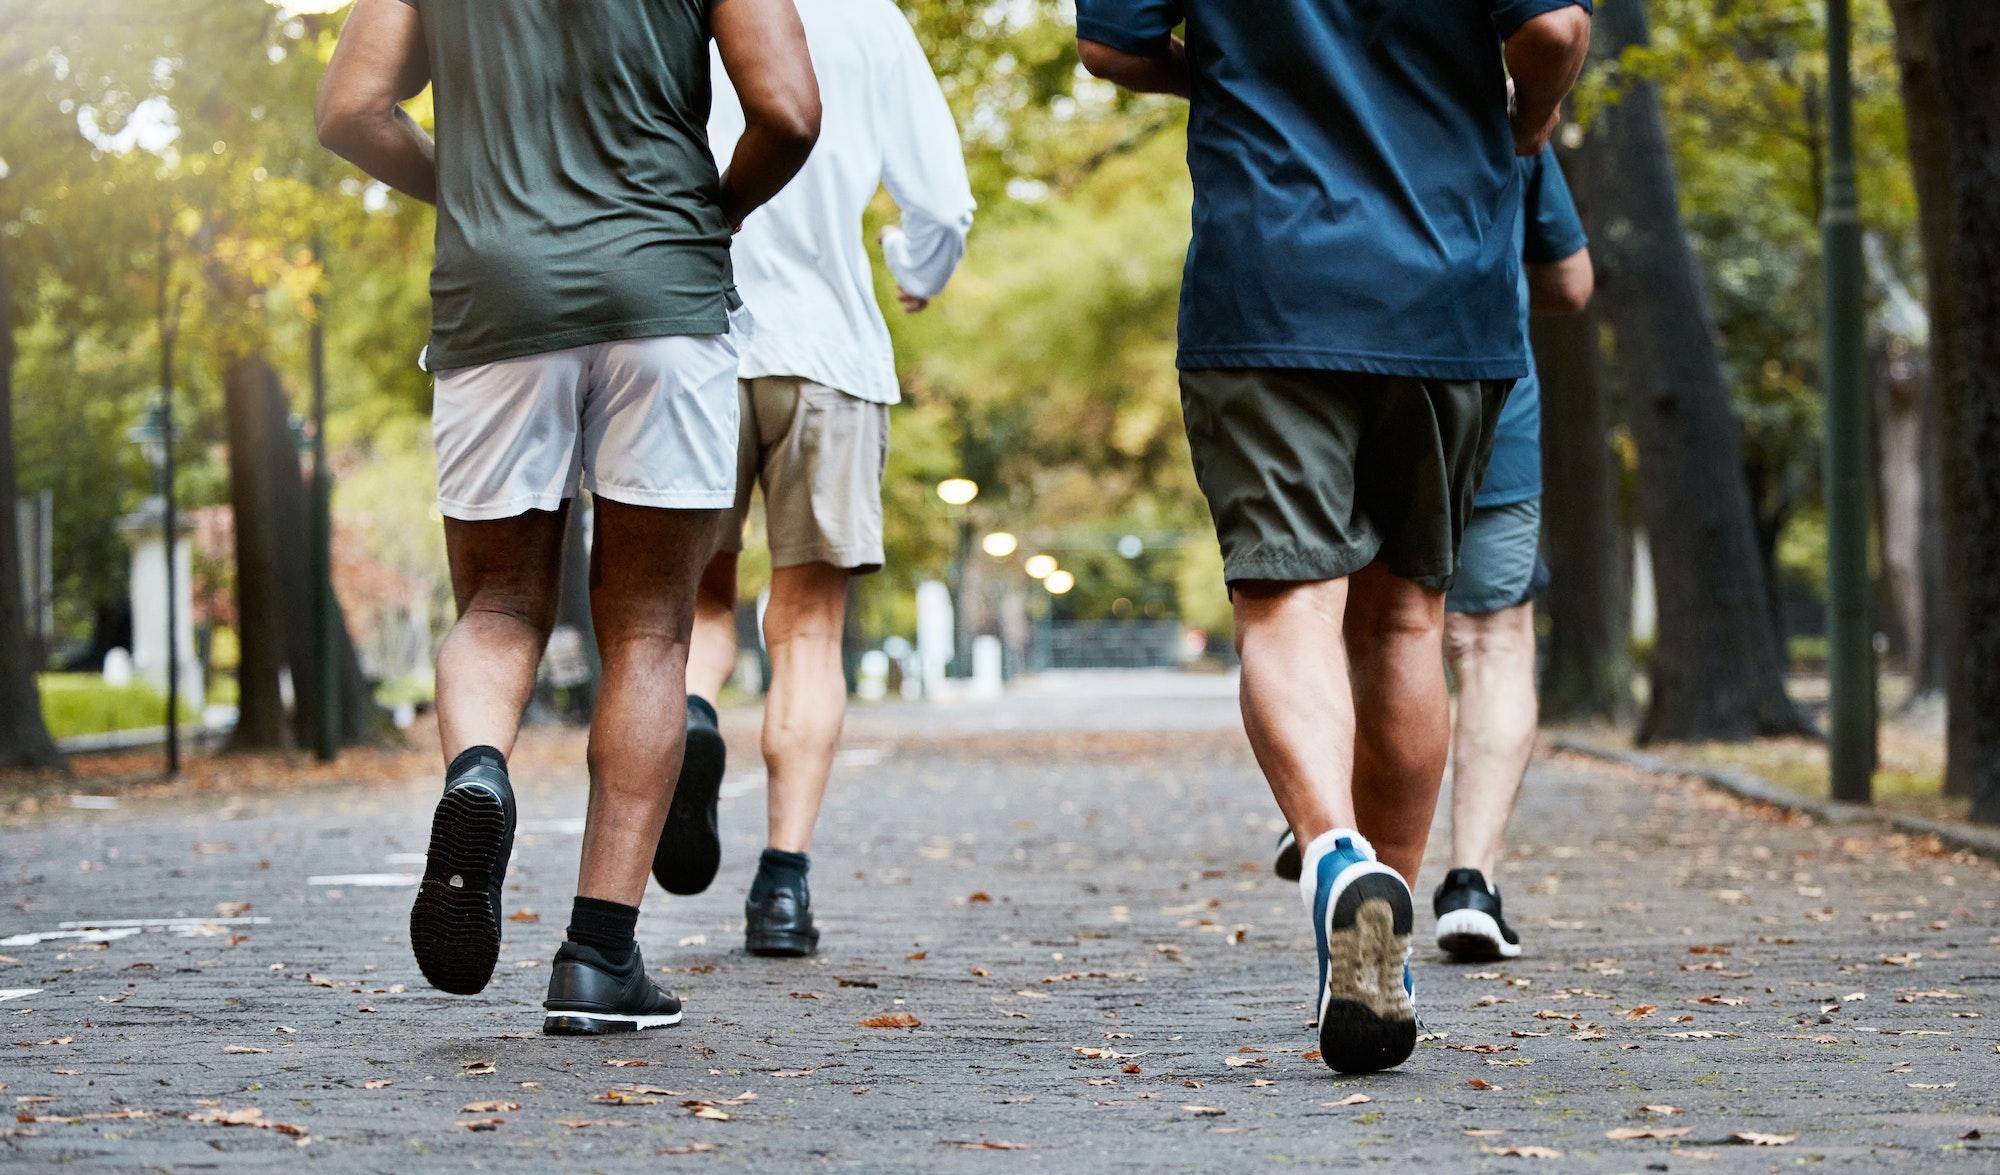 Fitness, men and running club in park, cropped legs in nature for exercise on garden path together.